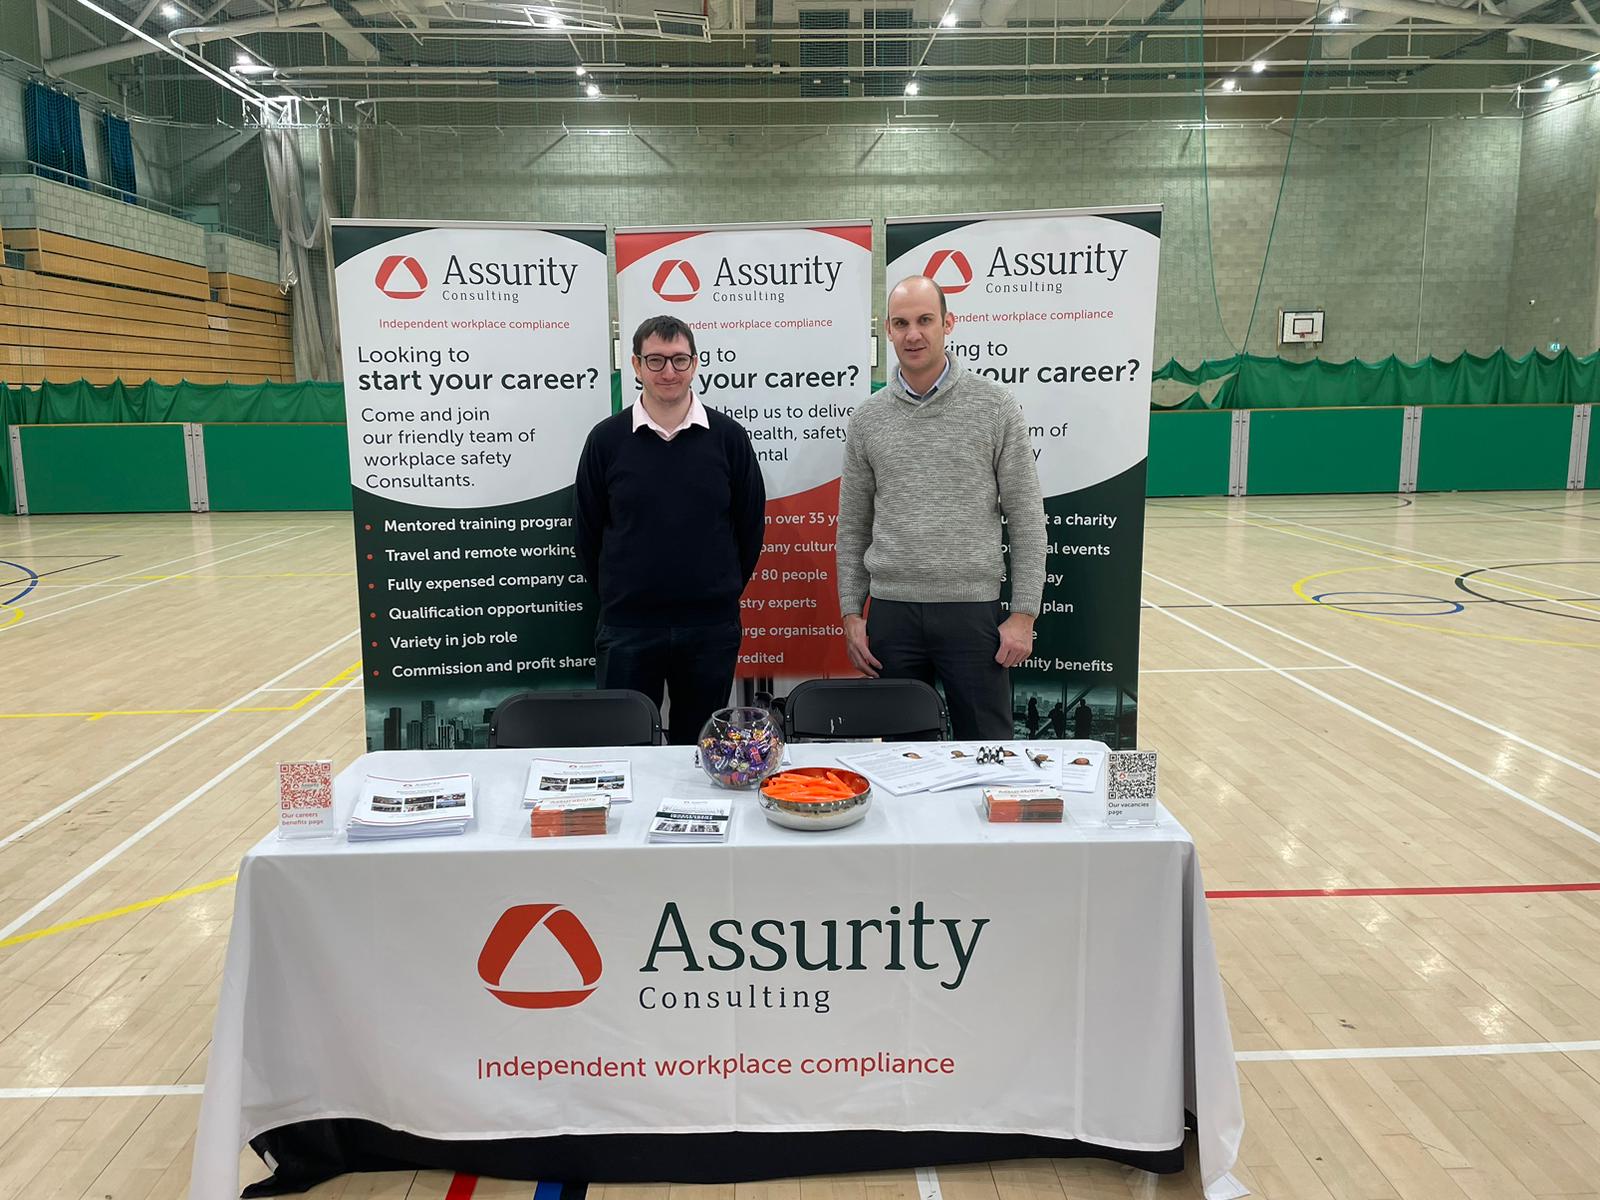 Assurity Consulting at our event in Crawley